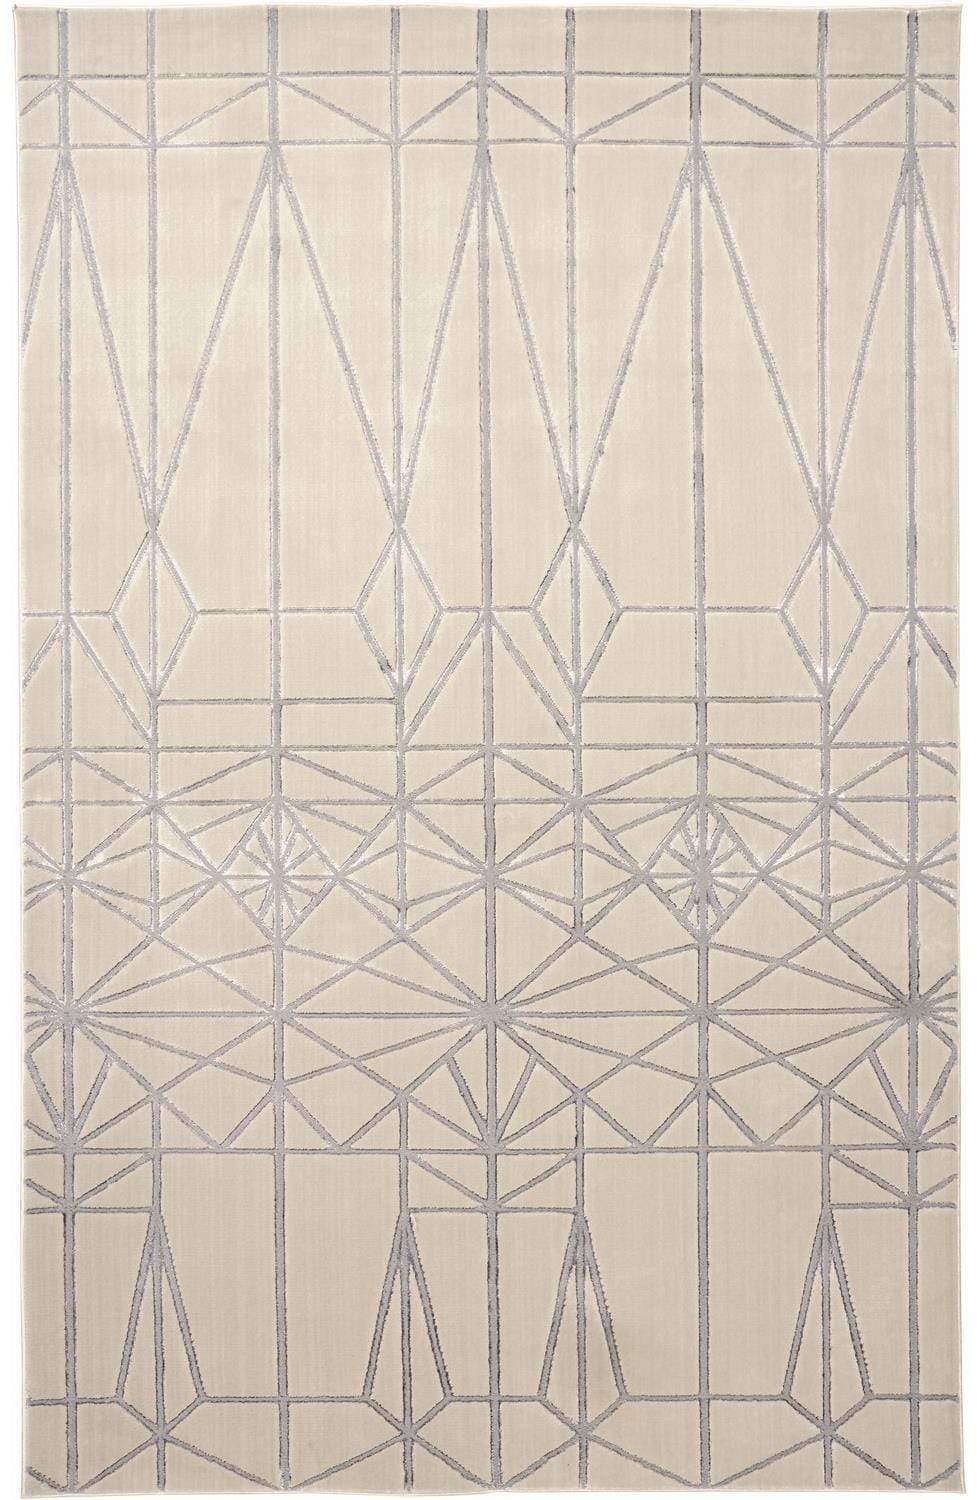 Feizy Feizy Micah Art Deco Architectural Rug - Available in 6 Sizes - Ivory Bone & Silver 5' x 8' 6943045FIVYSLVE10